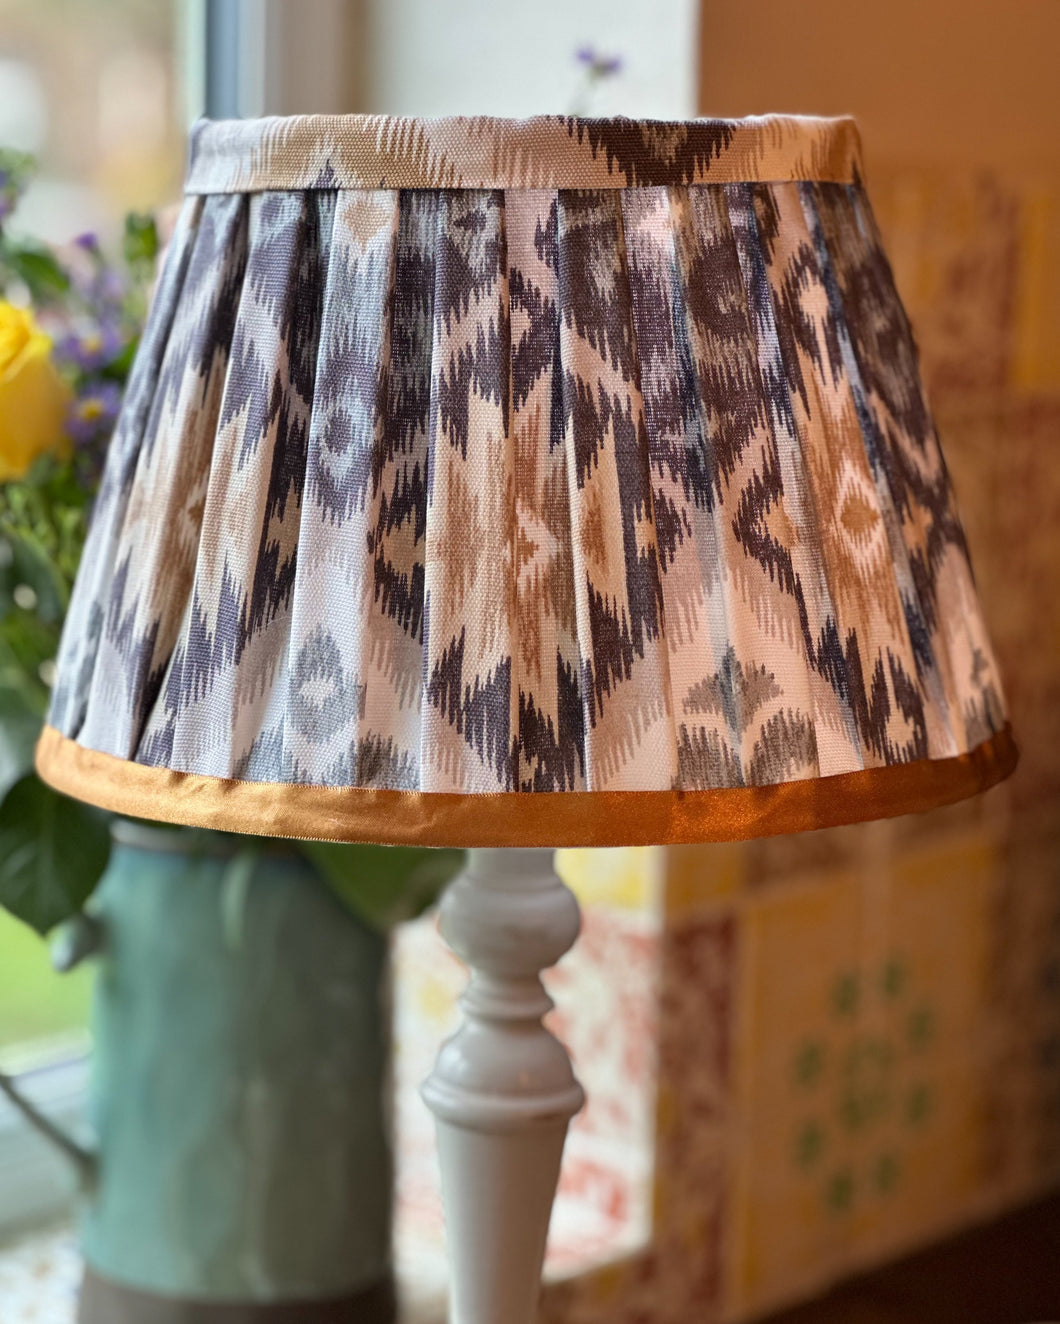 30cm Pleated Ikat Cotton Lampshade